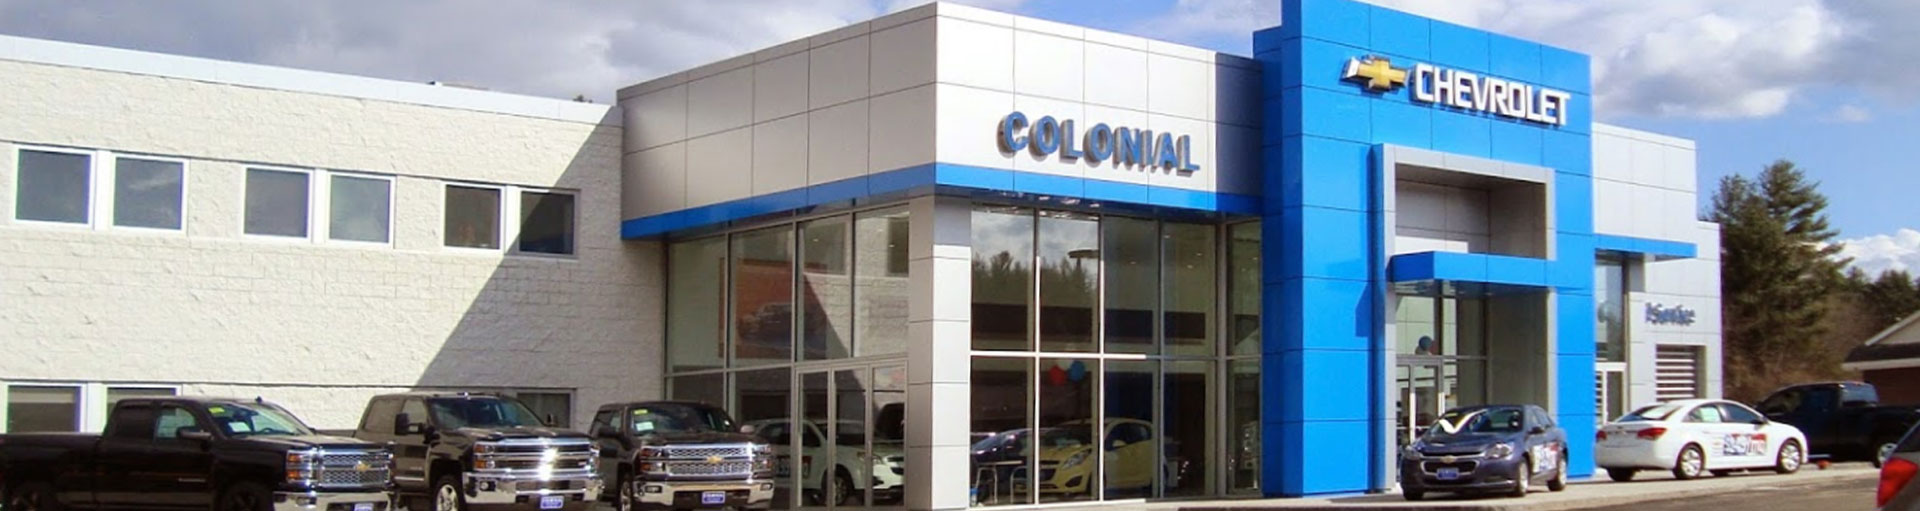 Colonial Chevrolet of Acton Commercial Truck Service Department